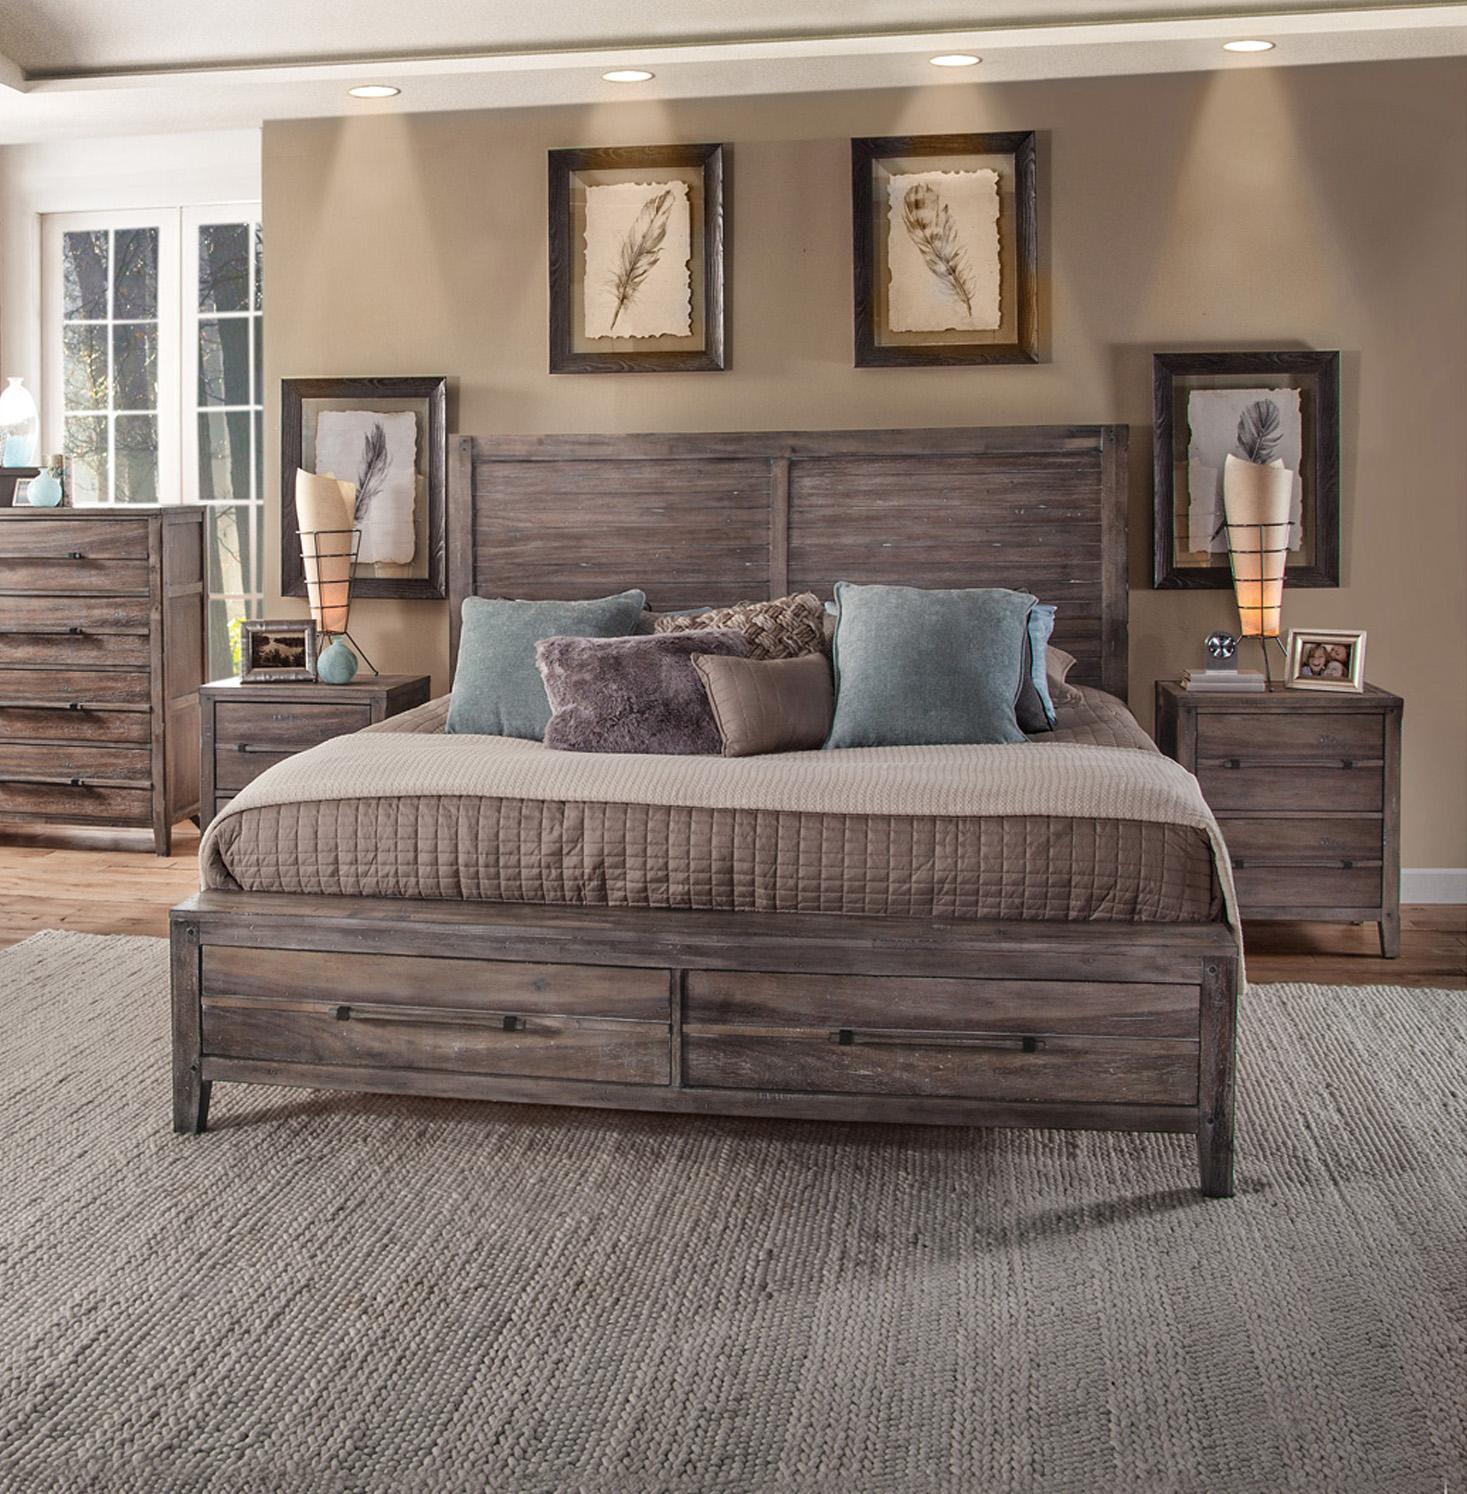 Classic, Traditional Panel Bedroom Set AURORA 2800-66PNST 2800-66PNST-2N-3PC in Driftwood, Gray 